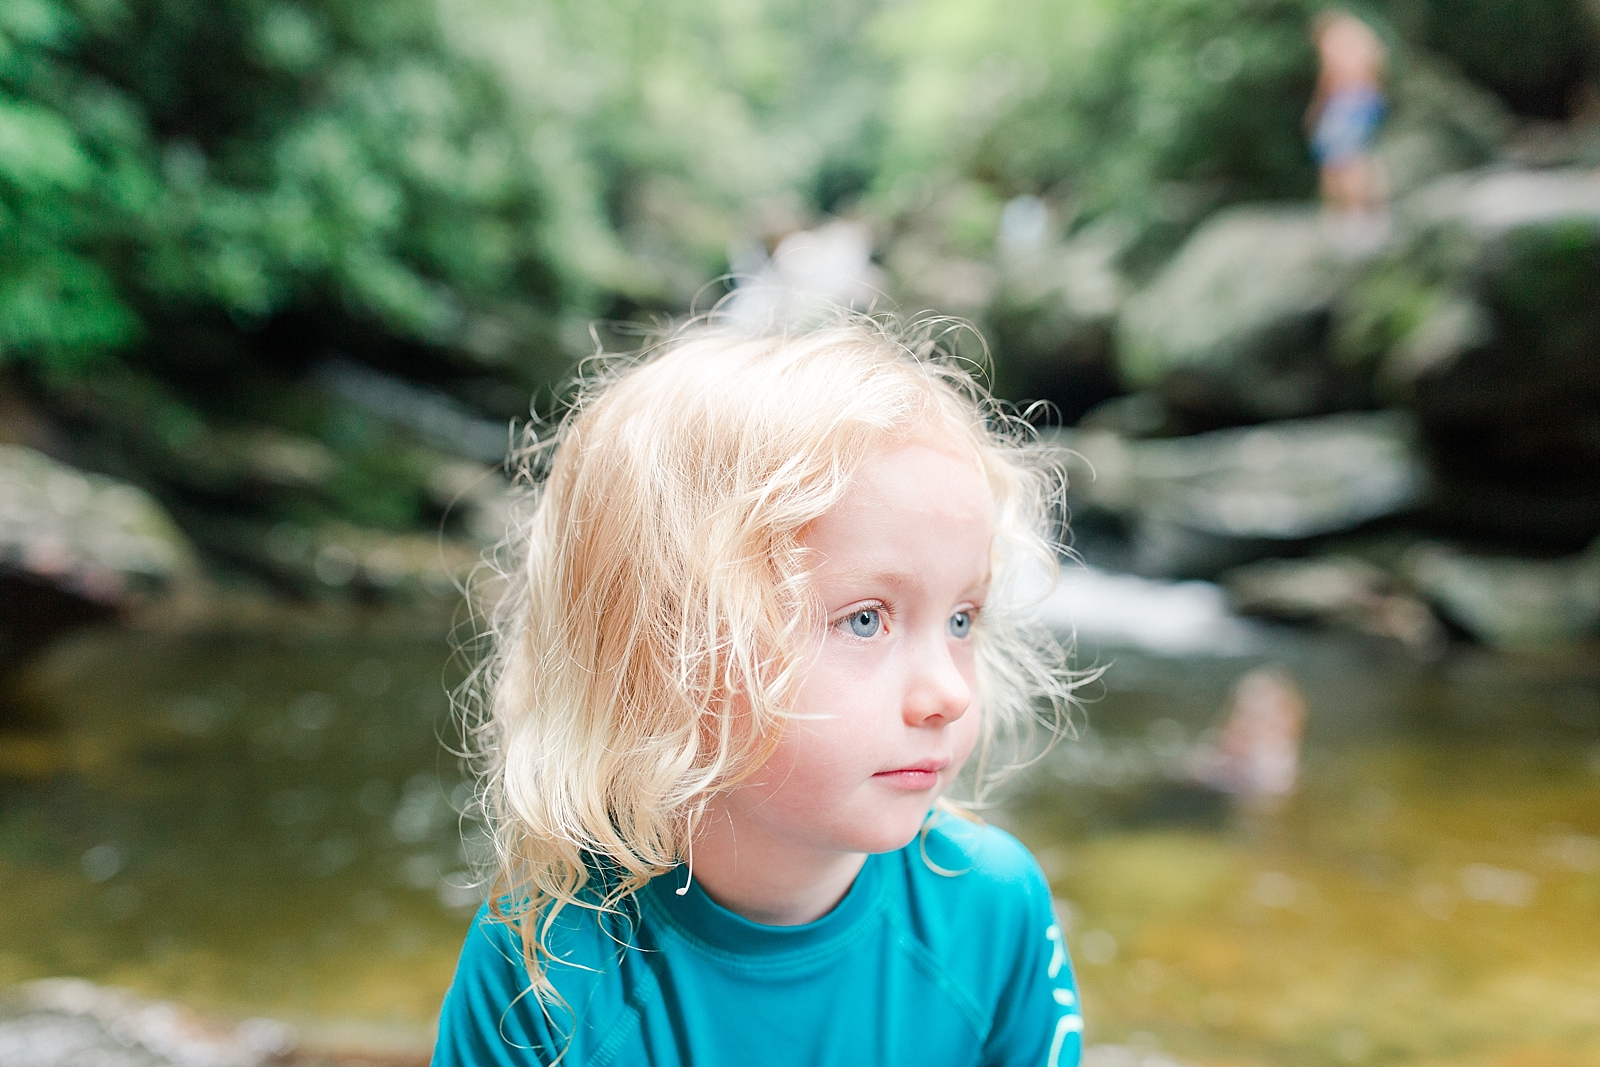 Skinny Dip Falls Blue eyed little girl with blonde hair looking off Photo